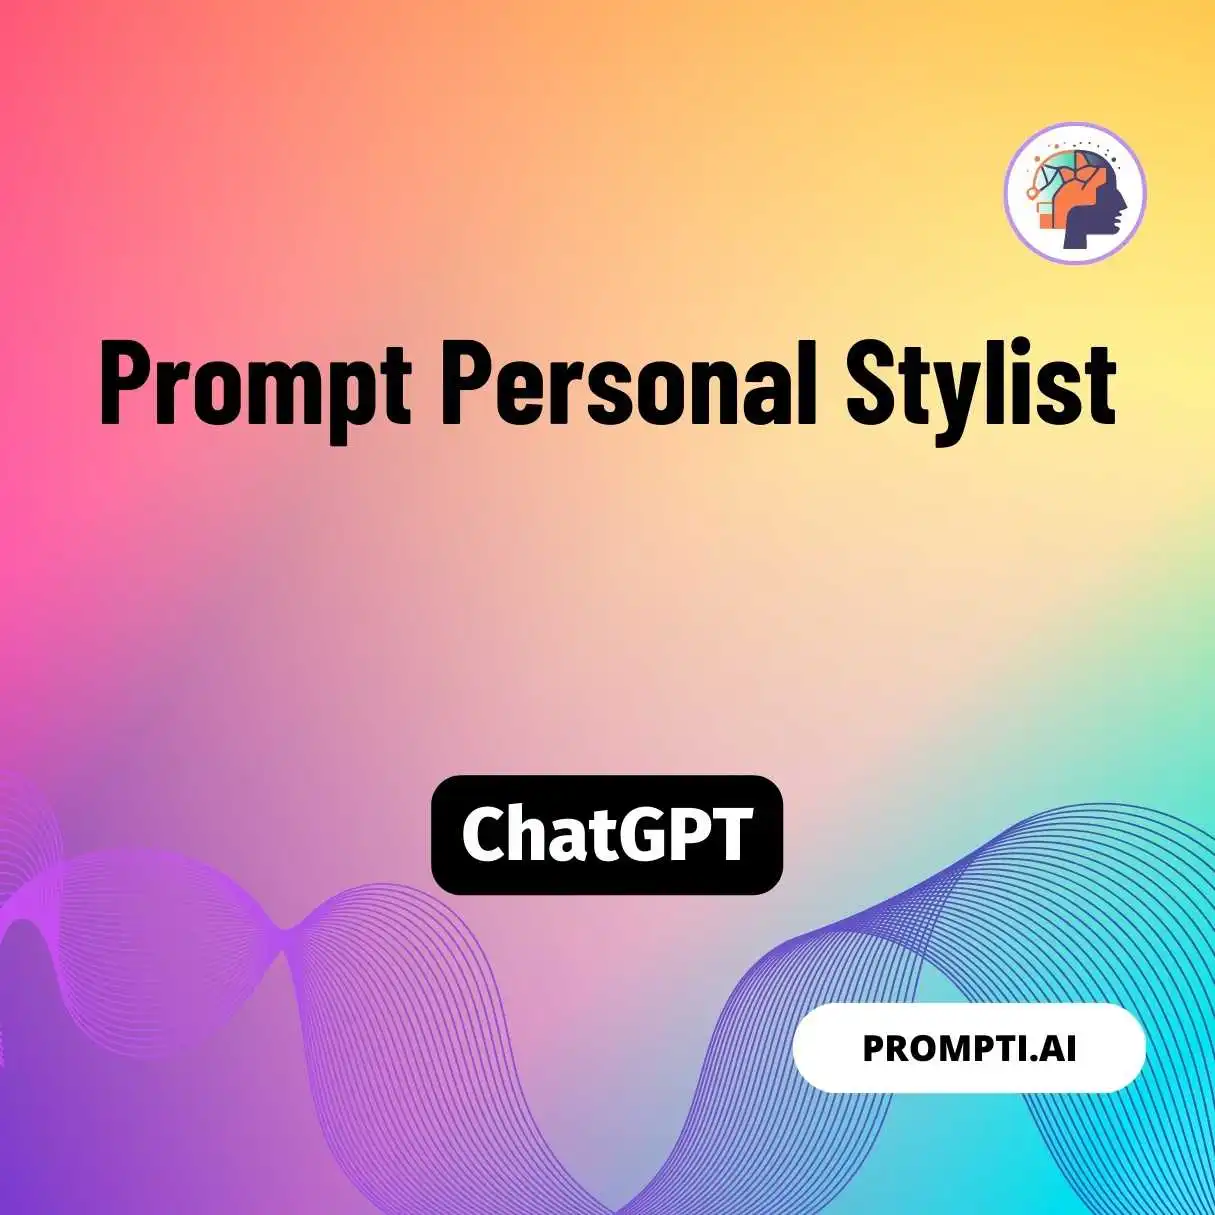 Prompt Personal Stylist